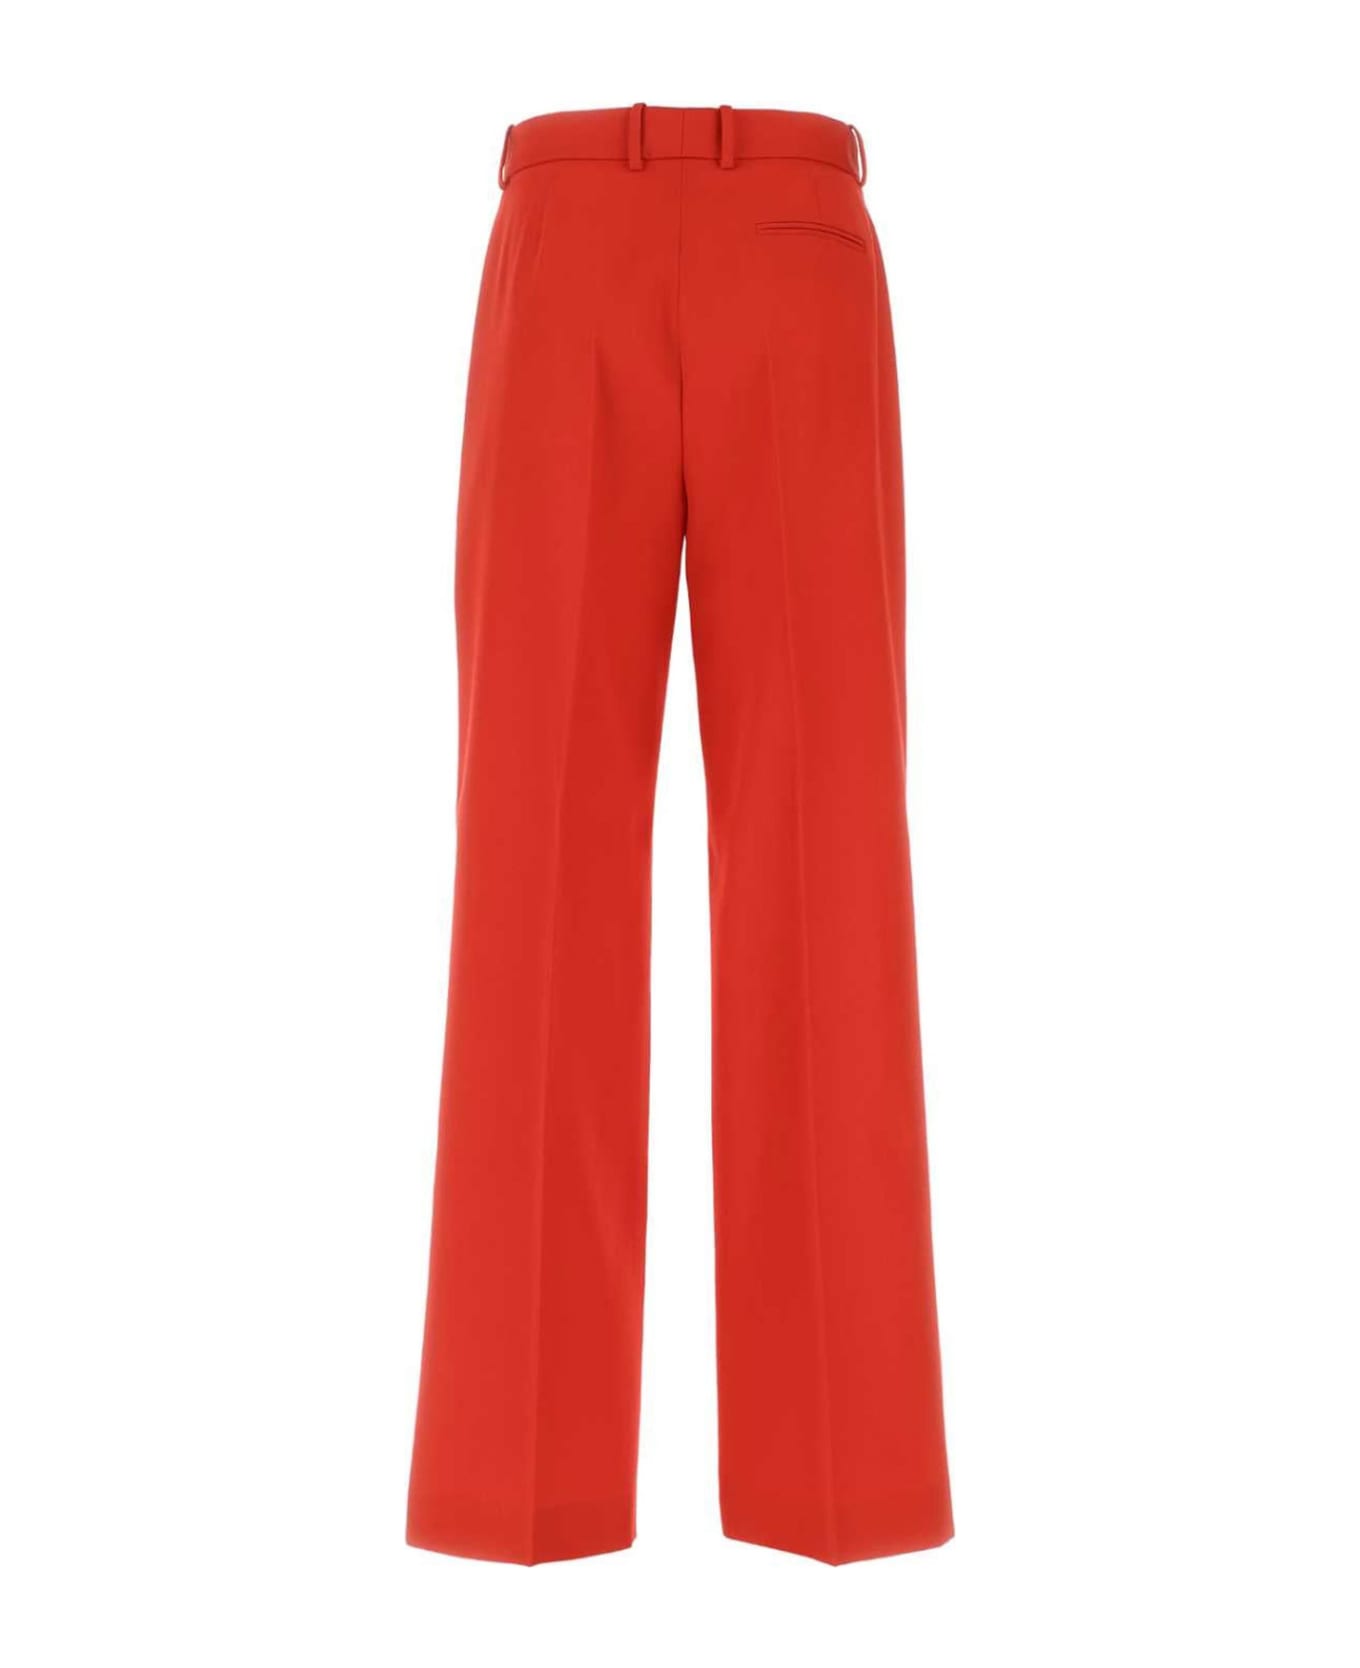 Lanvin Poppy Red Pants - Red ボトムス